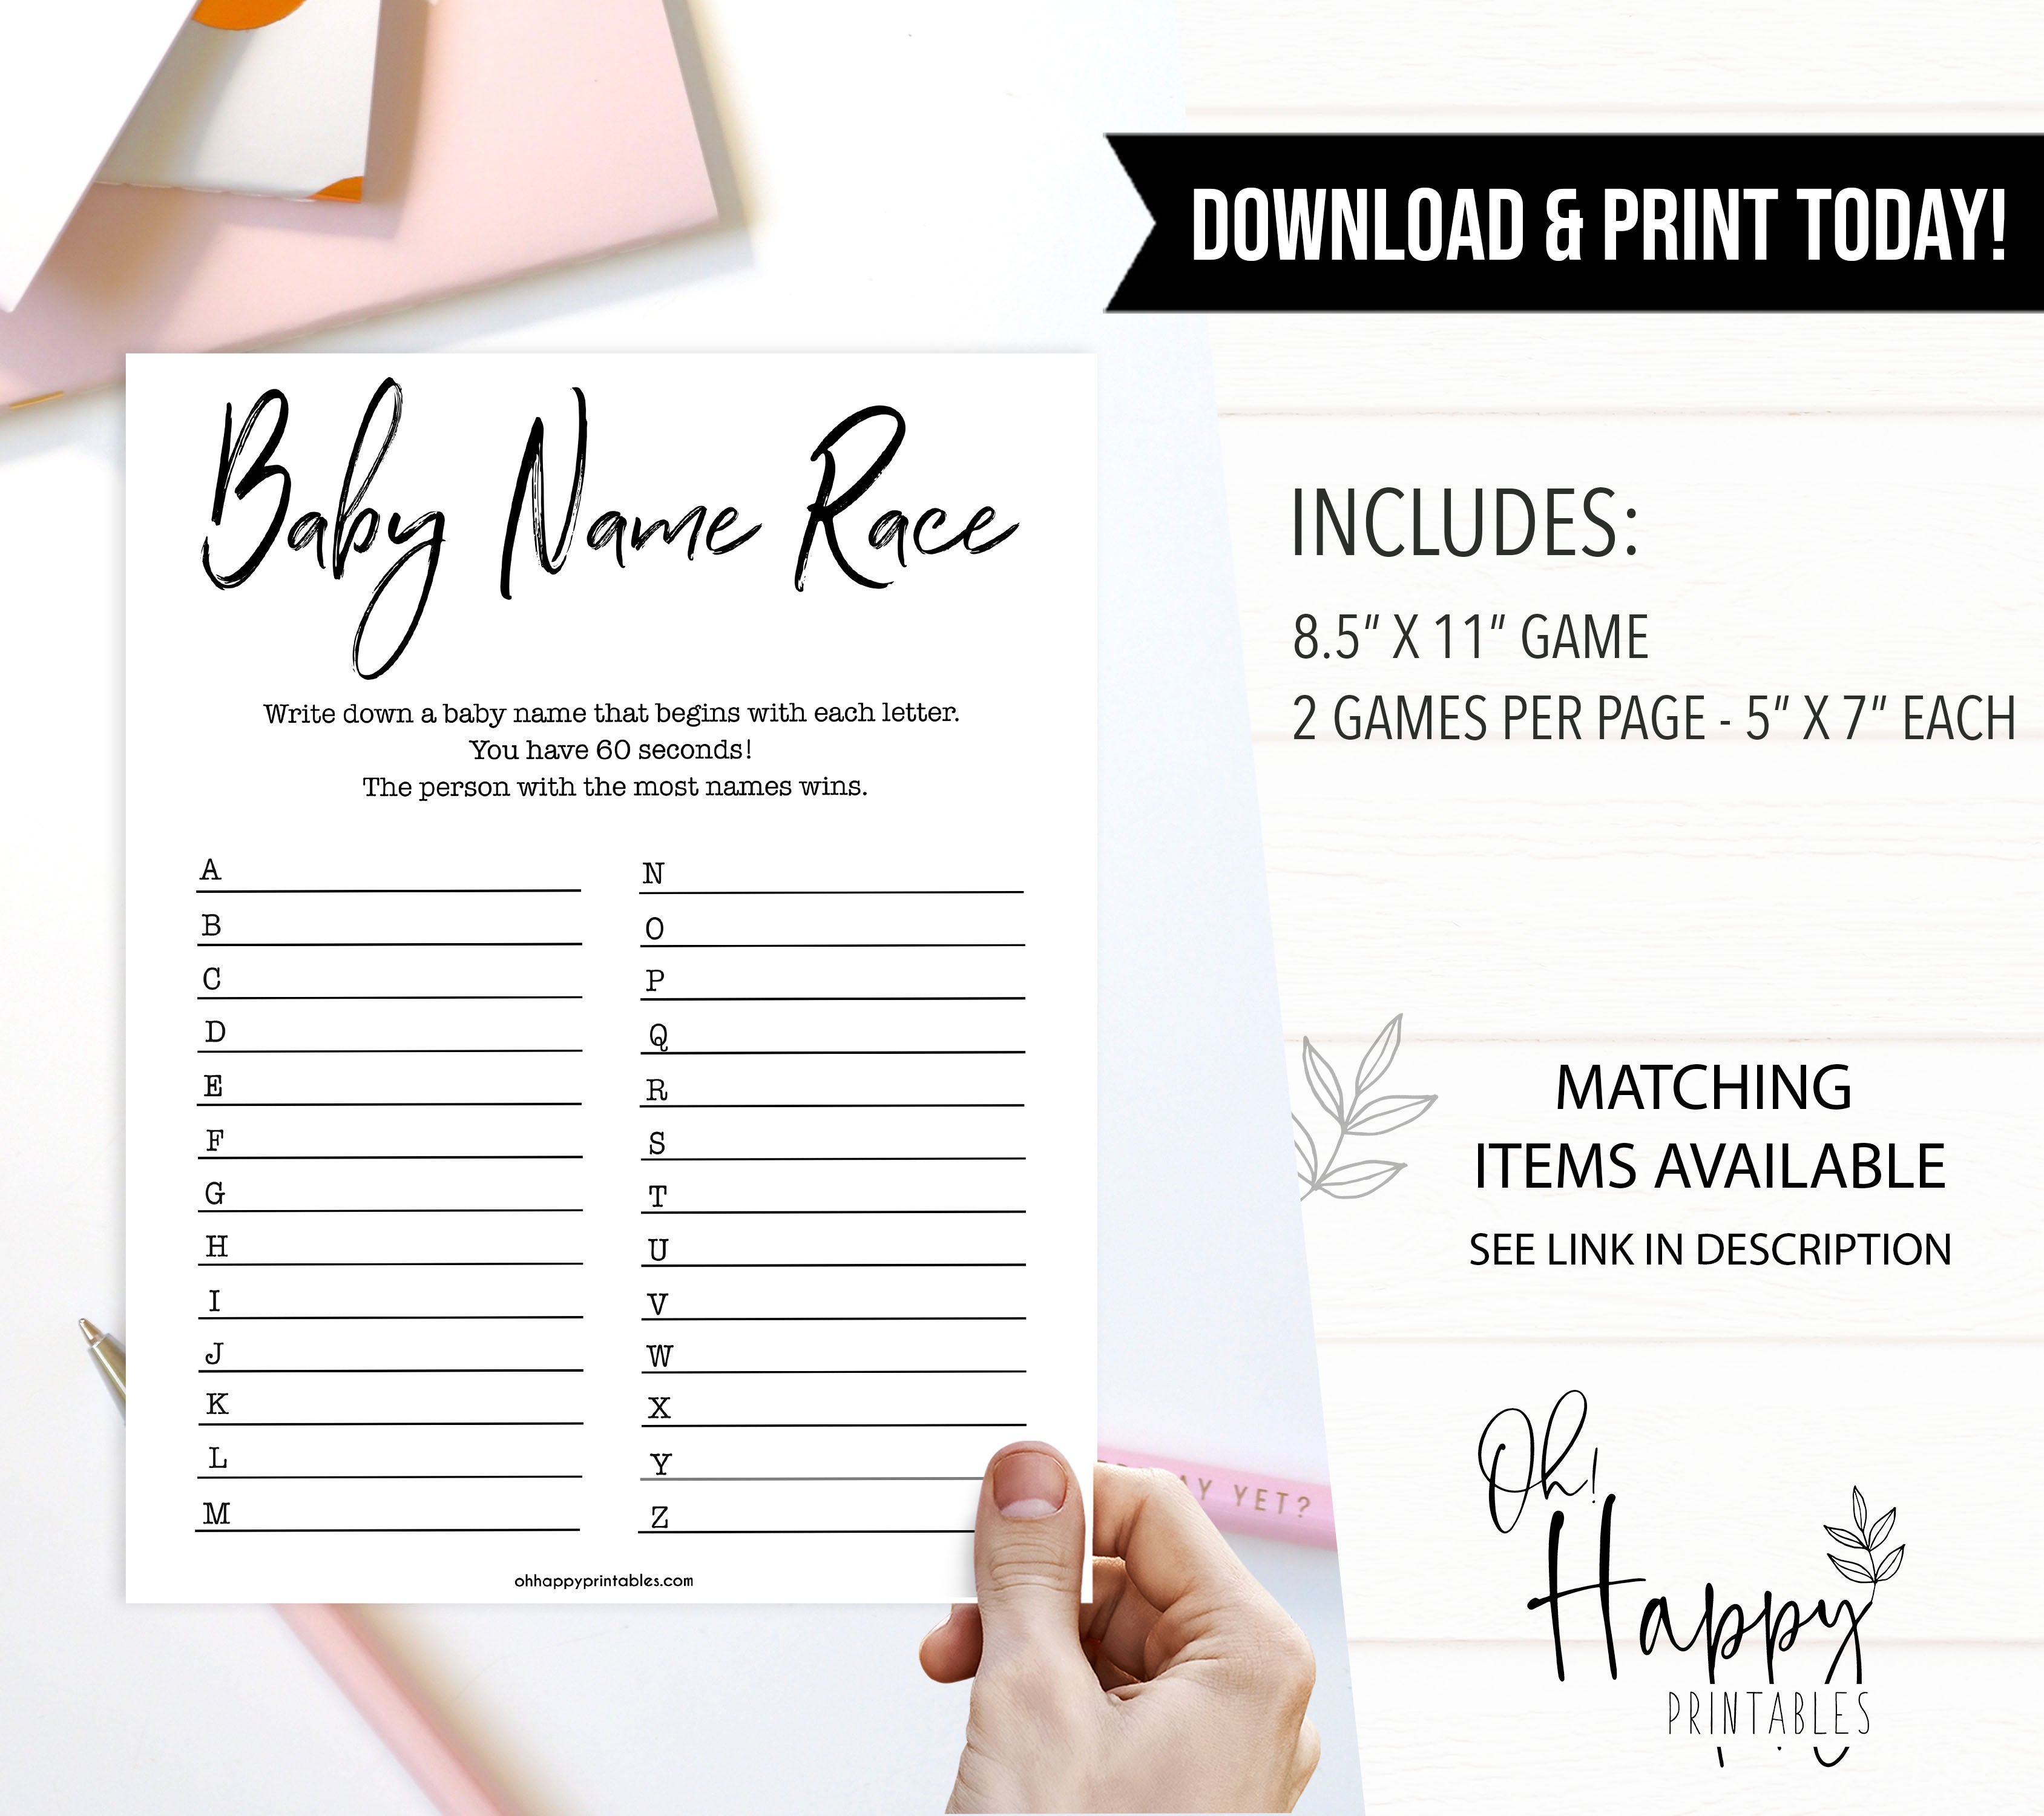 Minimalist baby shower games, baby name race baby games, 10 baby game bundles, fun baby games, printable baby games, top baby games, popular baby games, labor or porn games, neutral baby games, gender reveal games